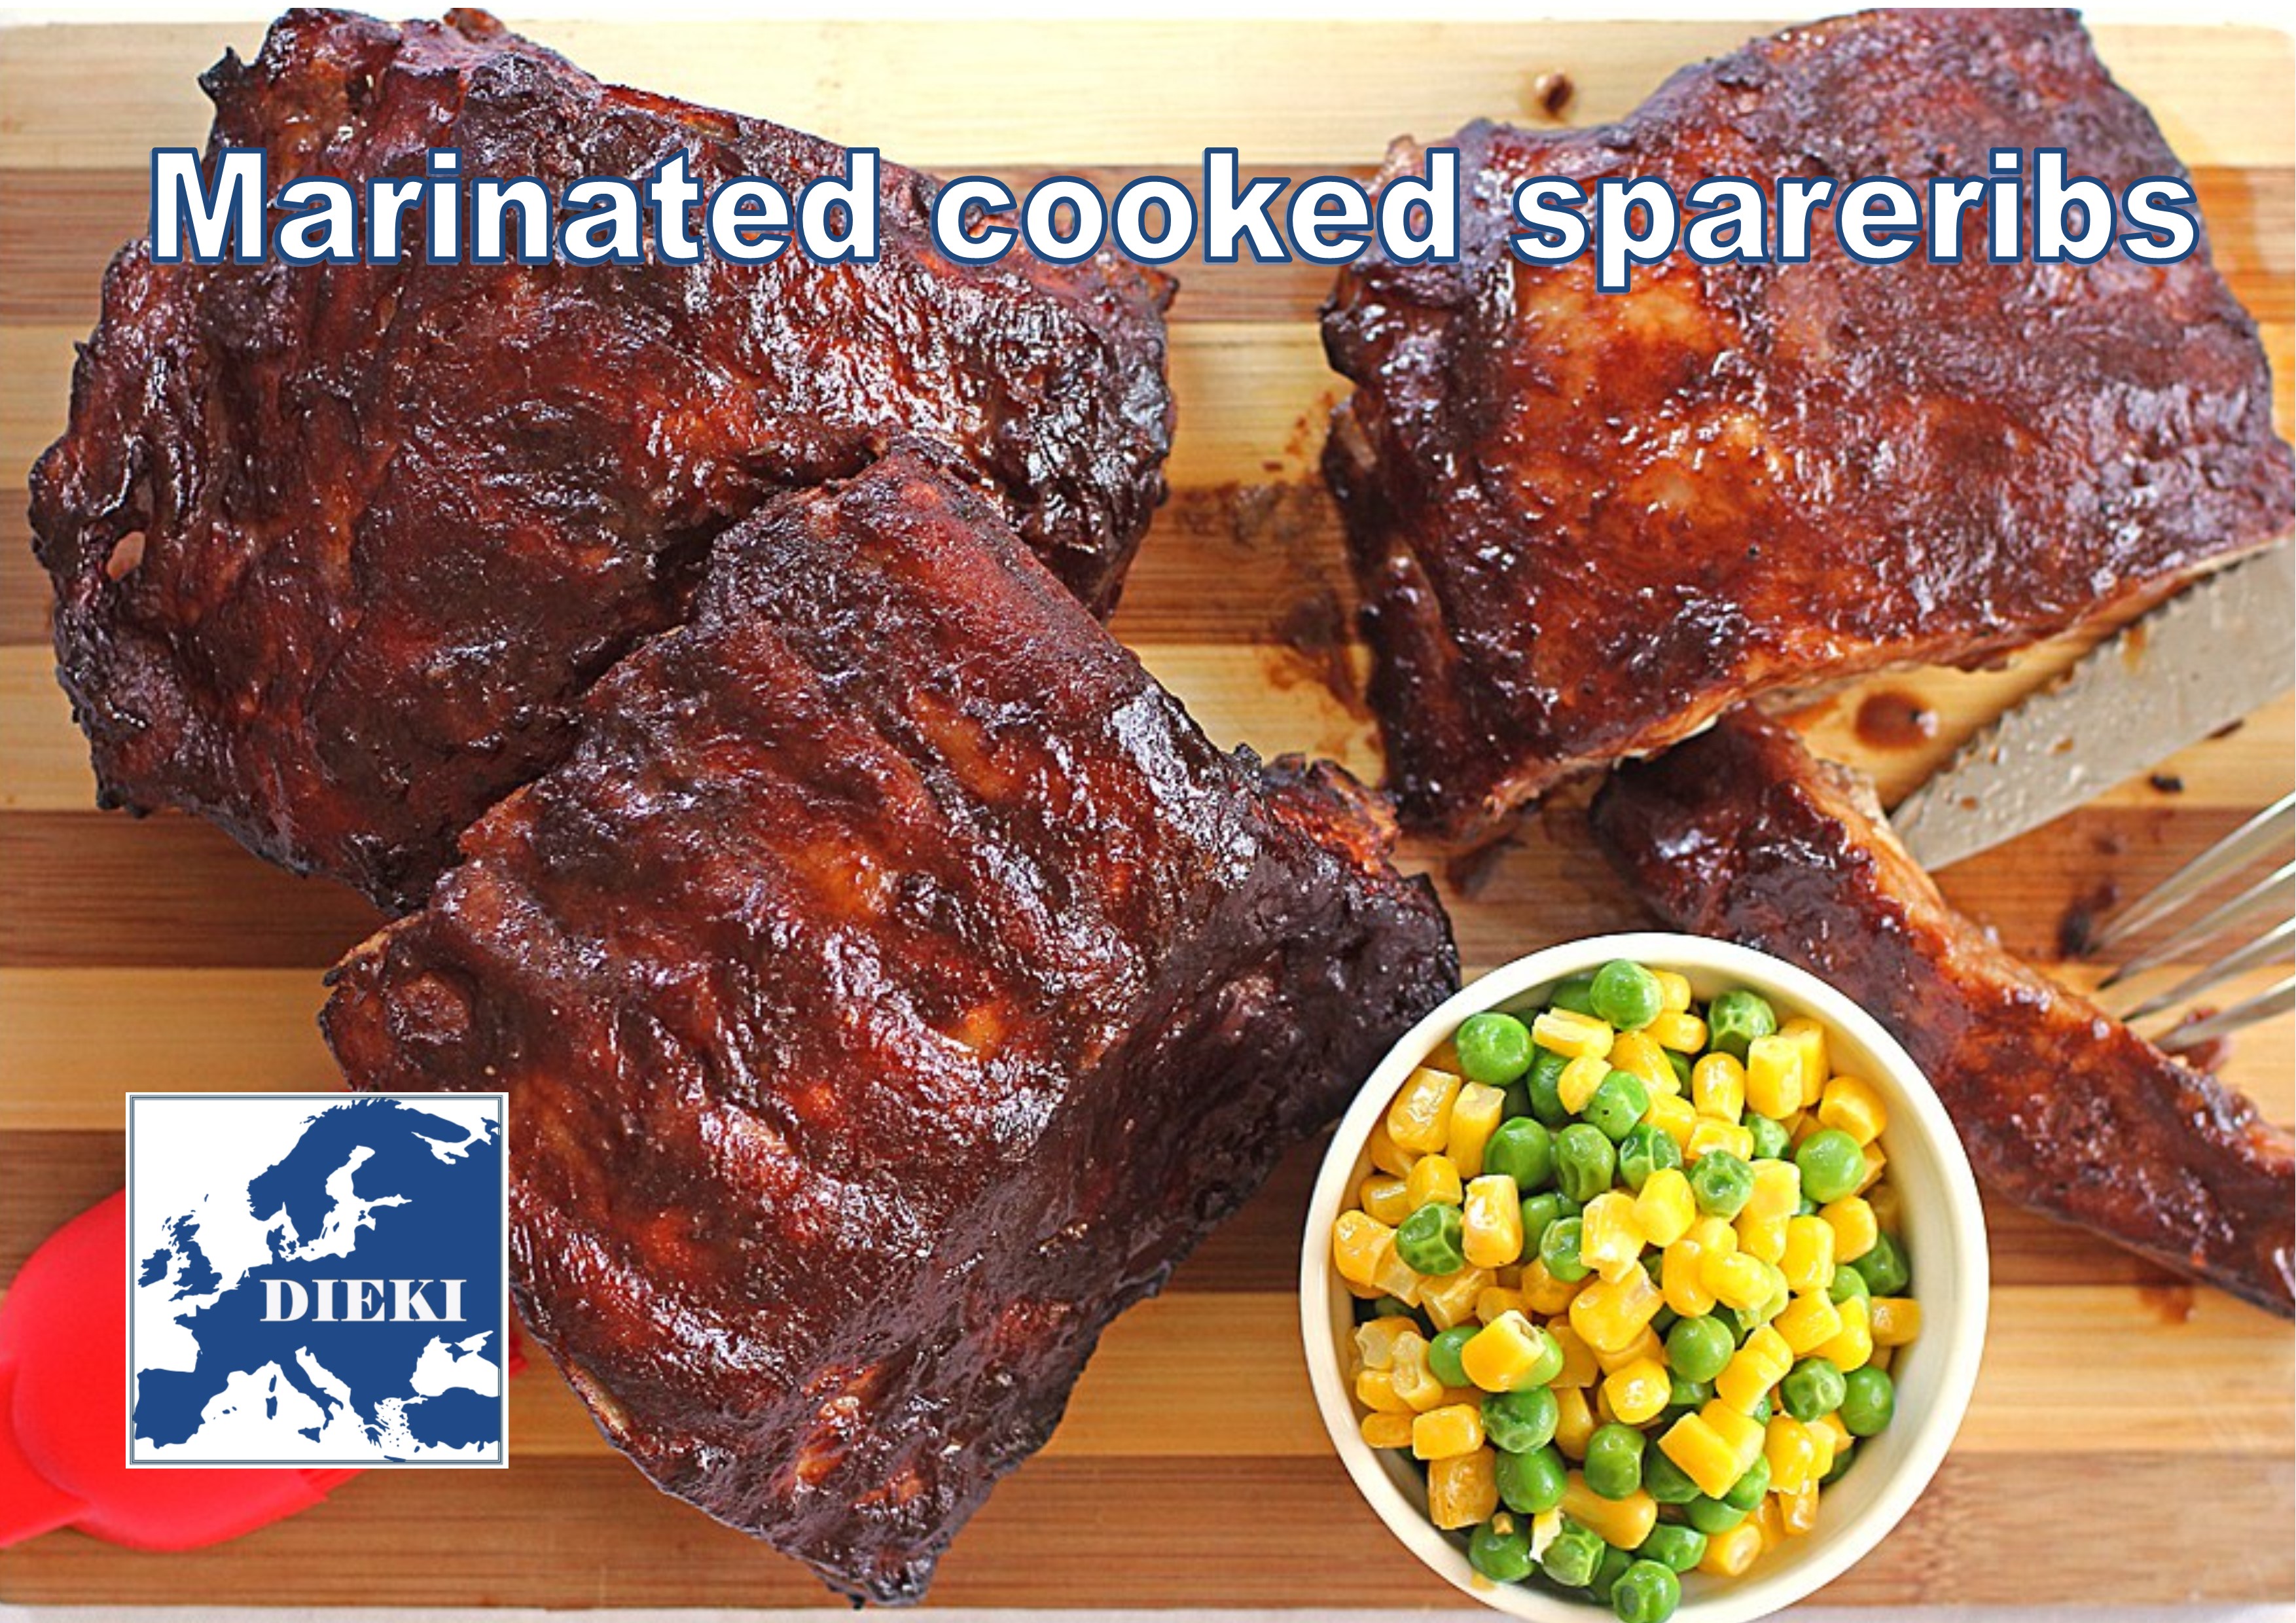 Indrukwekkend Deskundige Dwaal Microwave or oven ready: spare ribs – For Poultry, Meat and Foodproducts